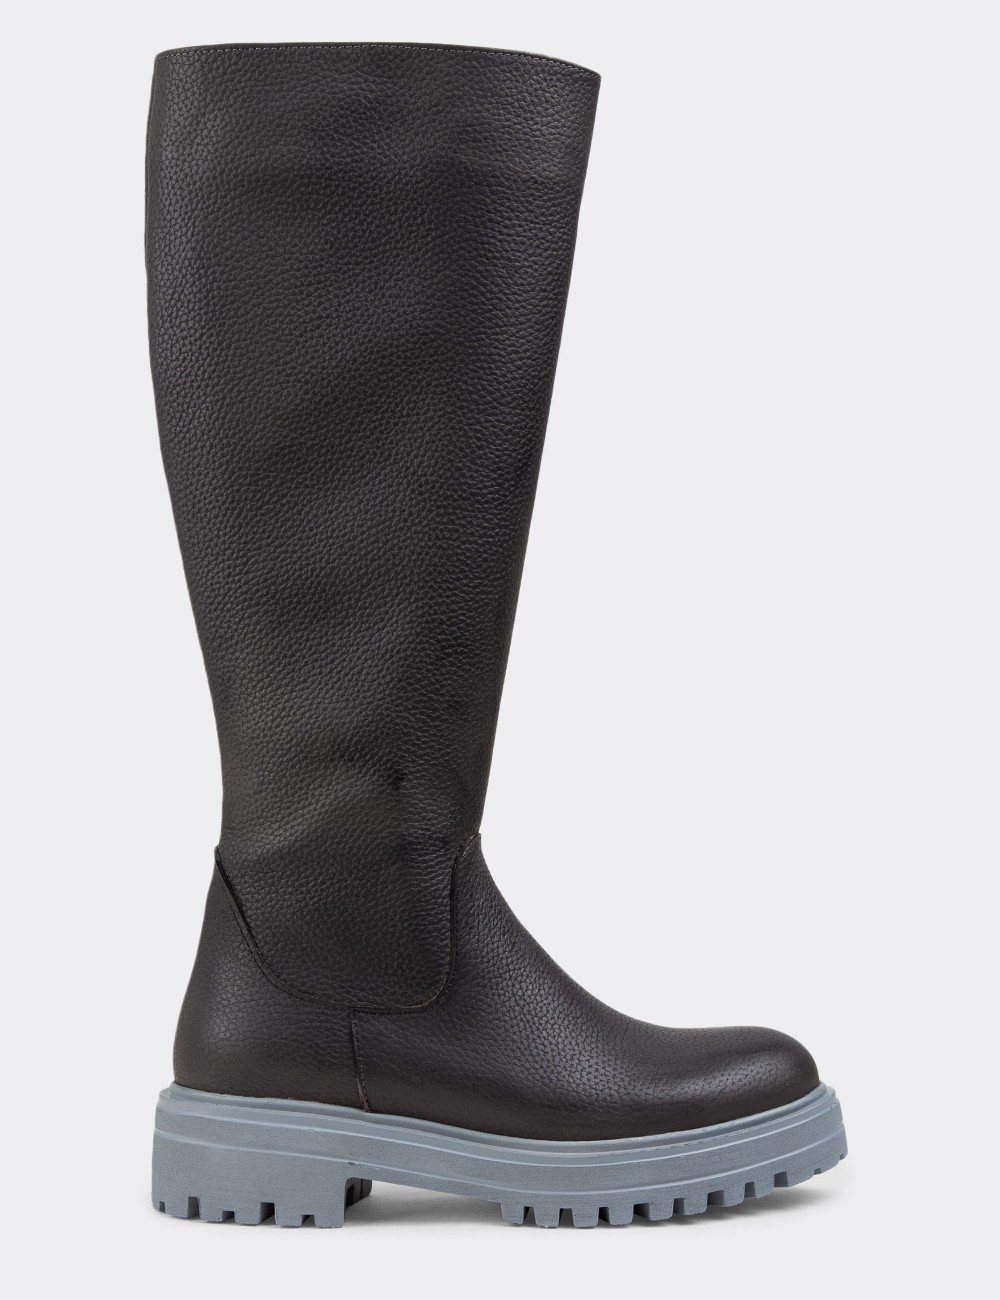 Gray Leather Boots - 01807ZGRIE01